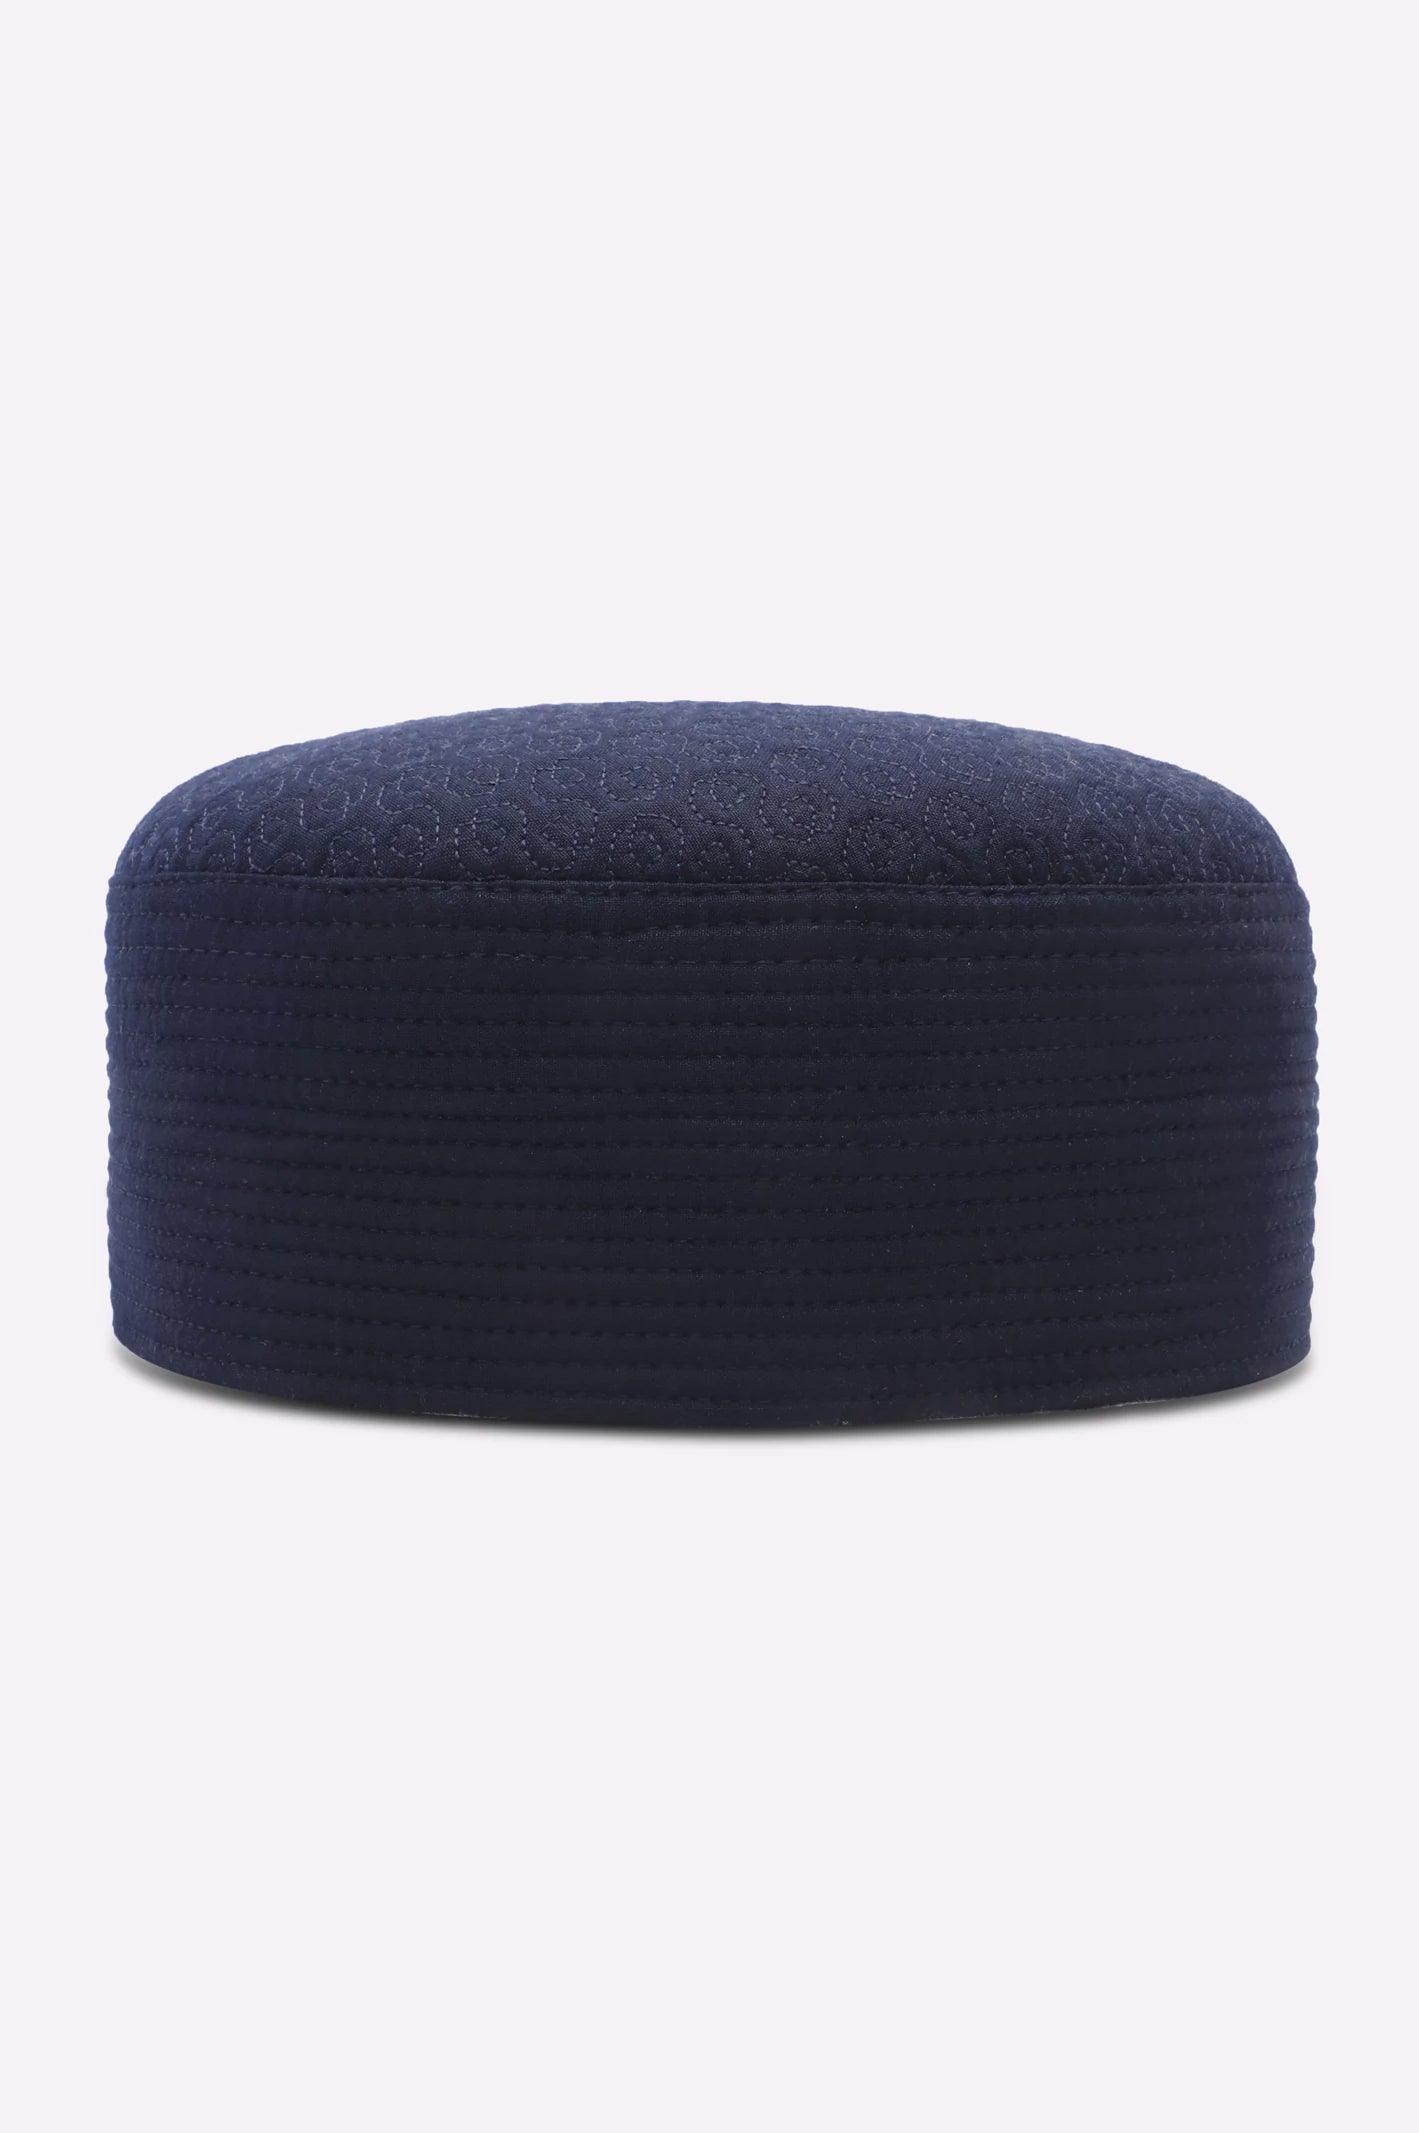 Dark Blue Caps For Men From Diners